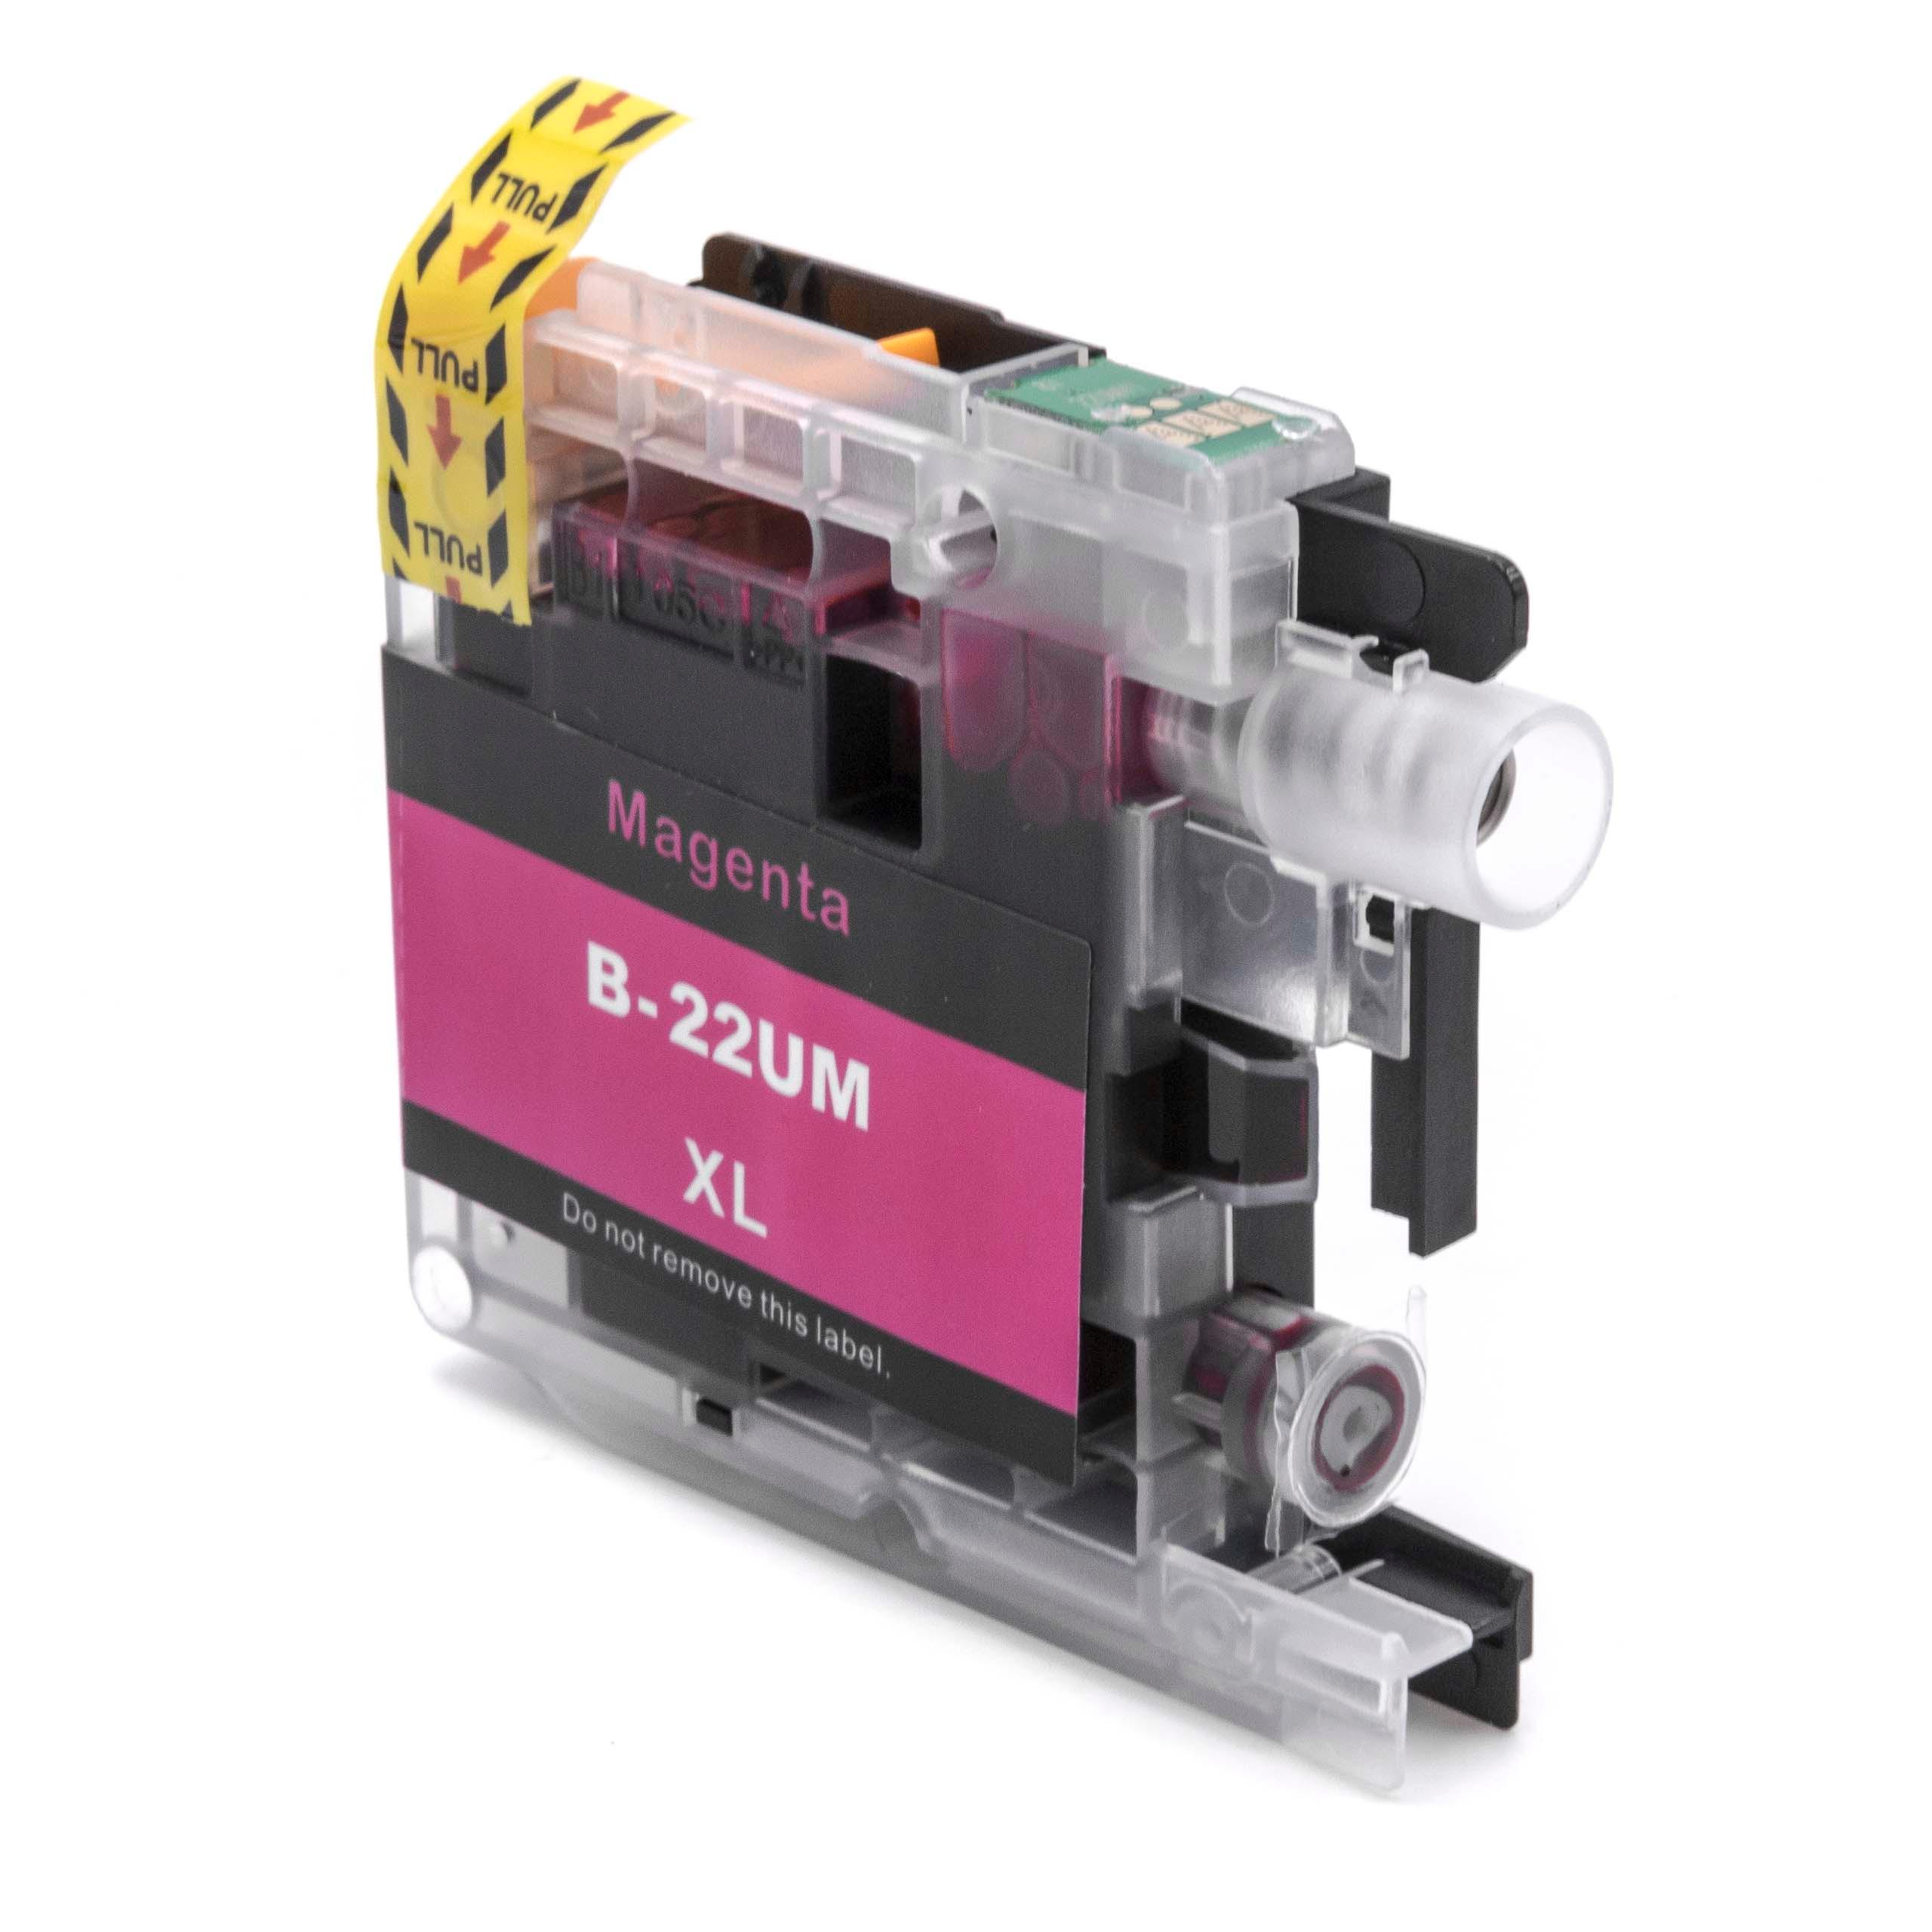 Ink Cartridge as Exchange for Brother LC22UM, LC-22UM for Brother Printer - Magenta 15 ml + Chip